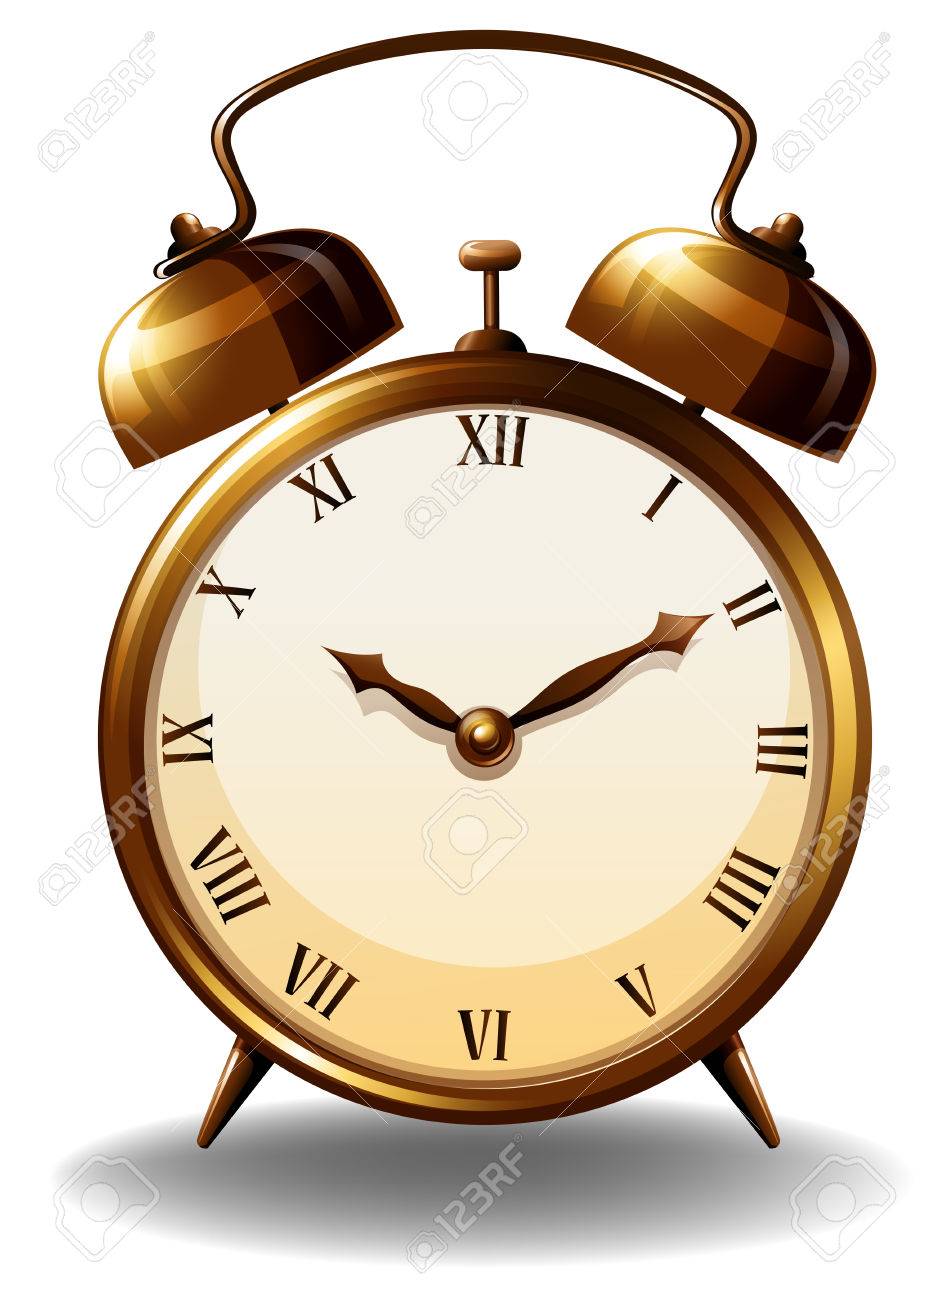 clocks clipart old fashioned